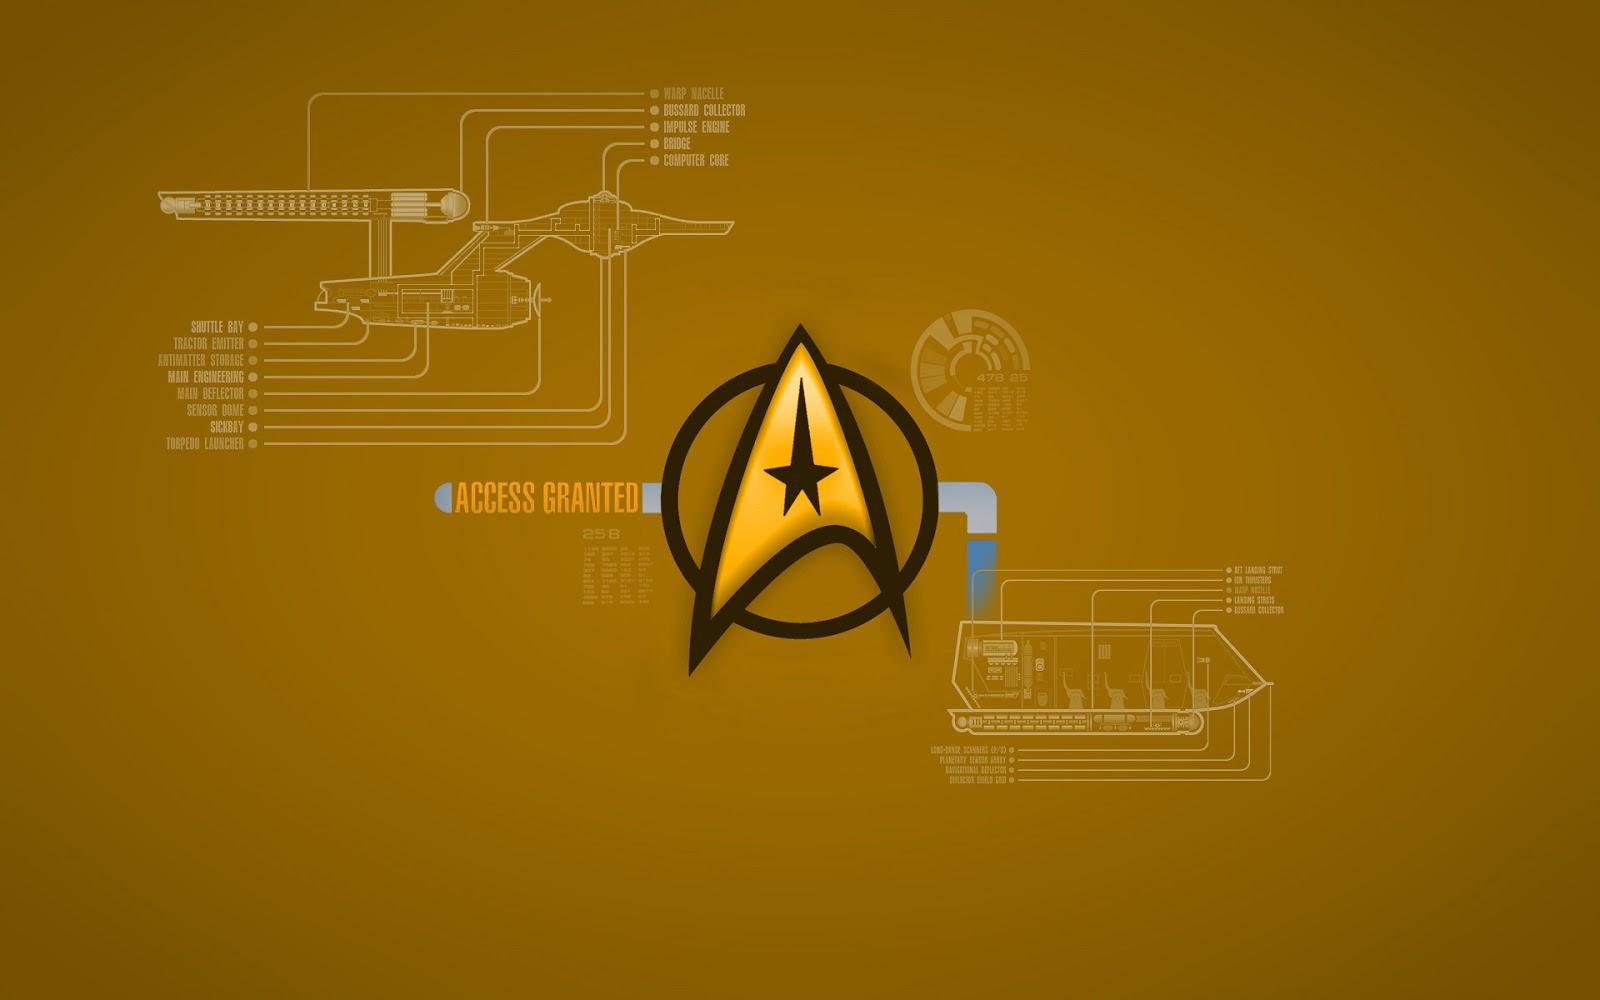 Star Trek Live Wallpaper 4.44 APK Download - Android Personalization Apps